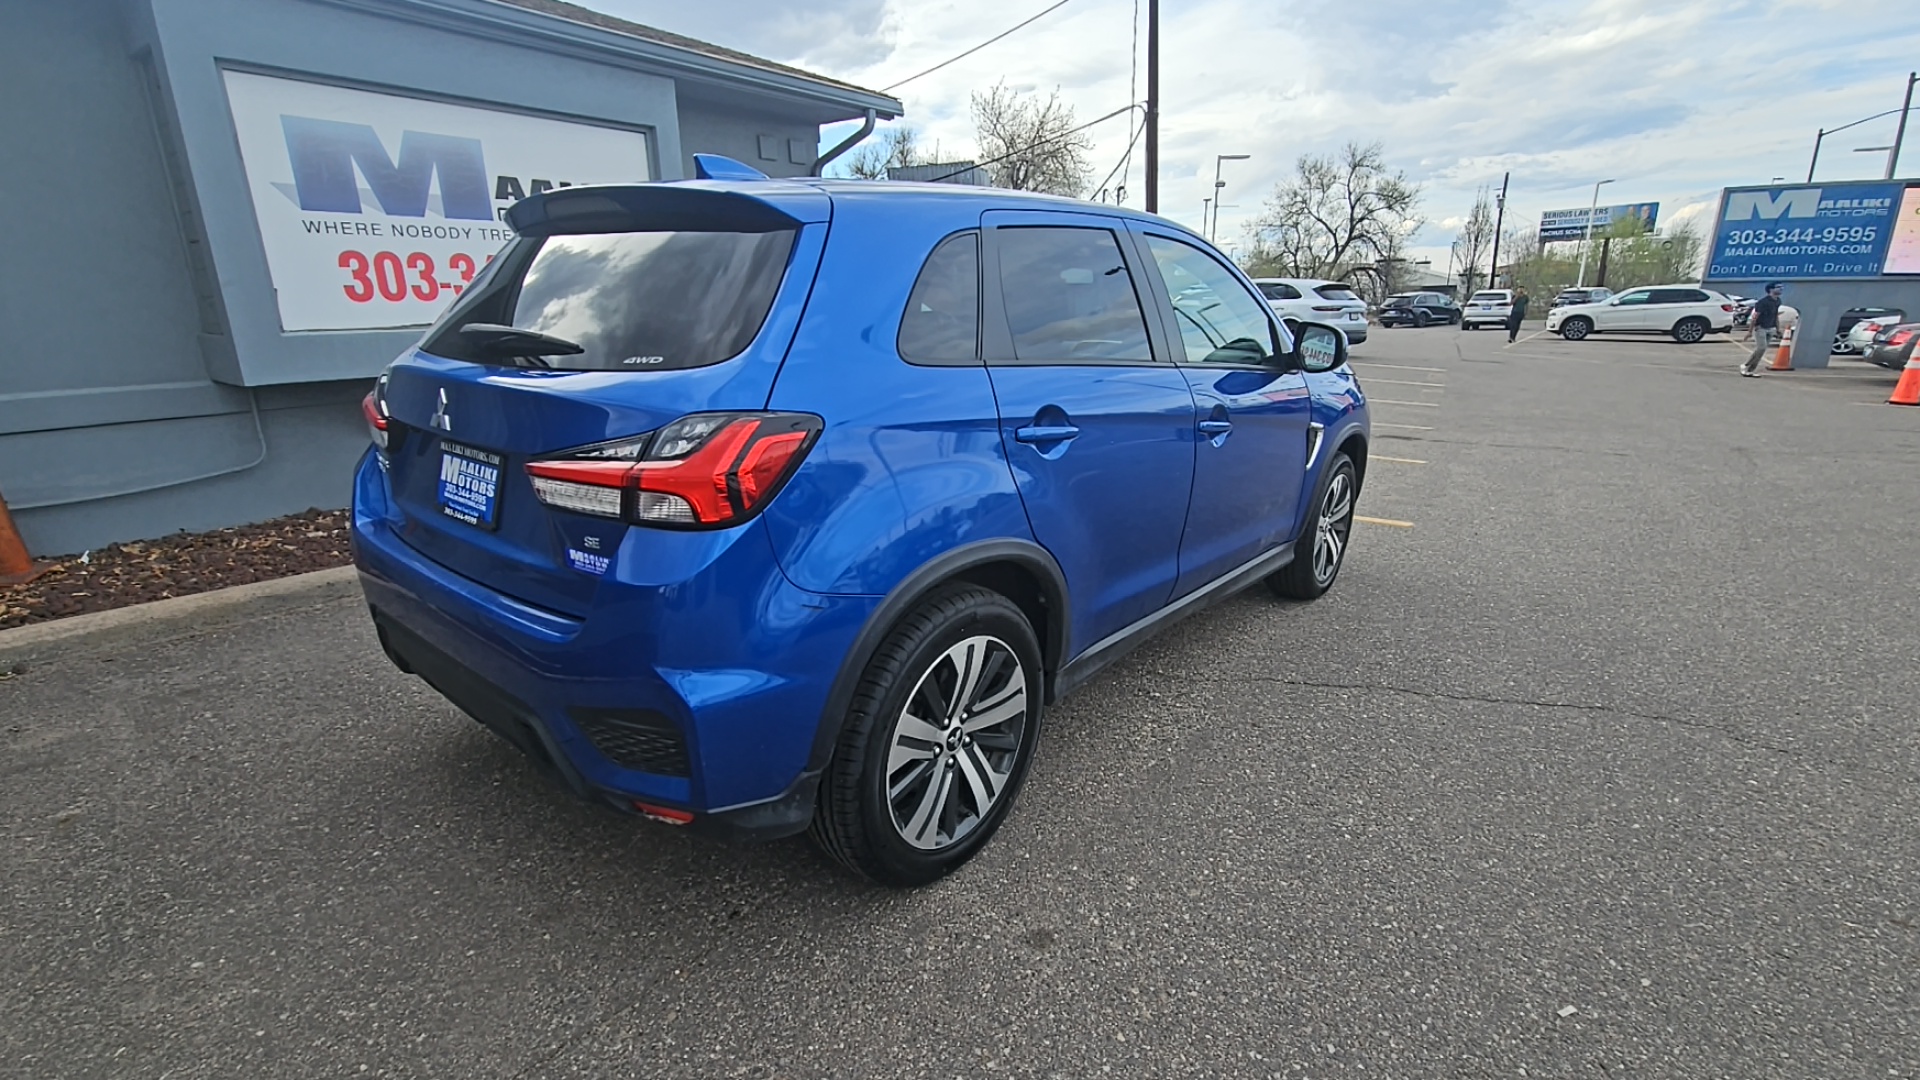 2021 Mitsubishi Outlander Sport SE All-Wheel Drive, Low Miles, AWD - Must See! 2